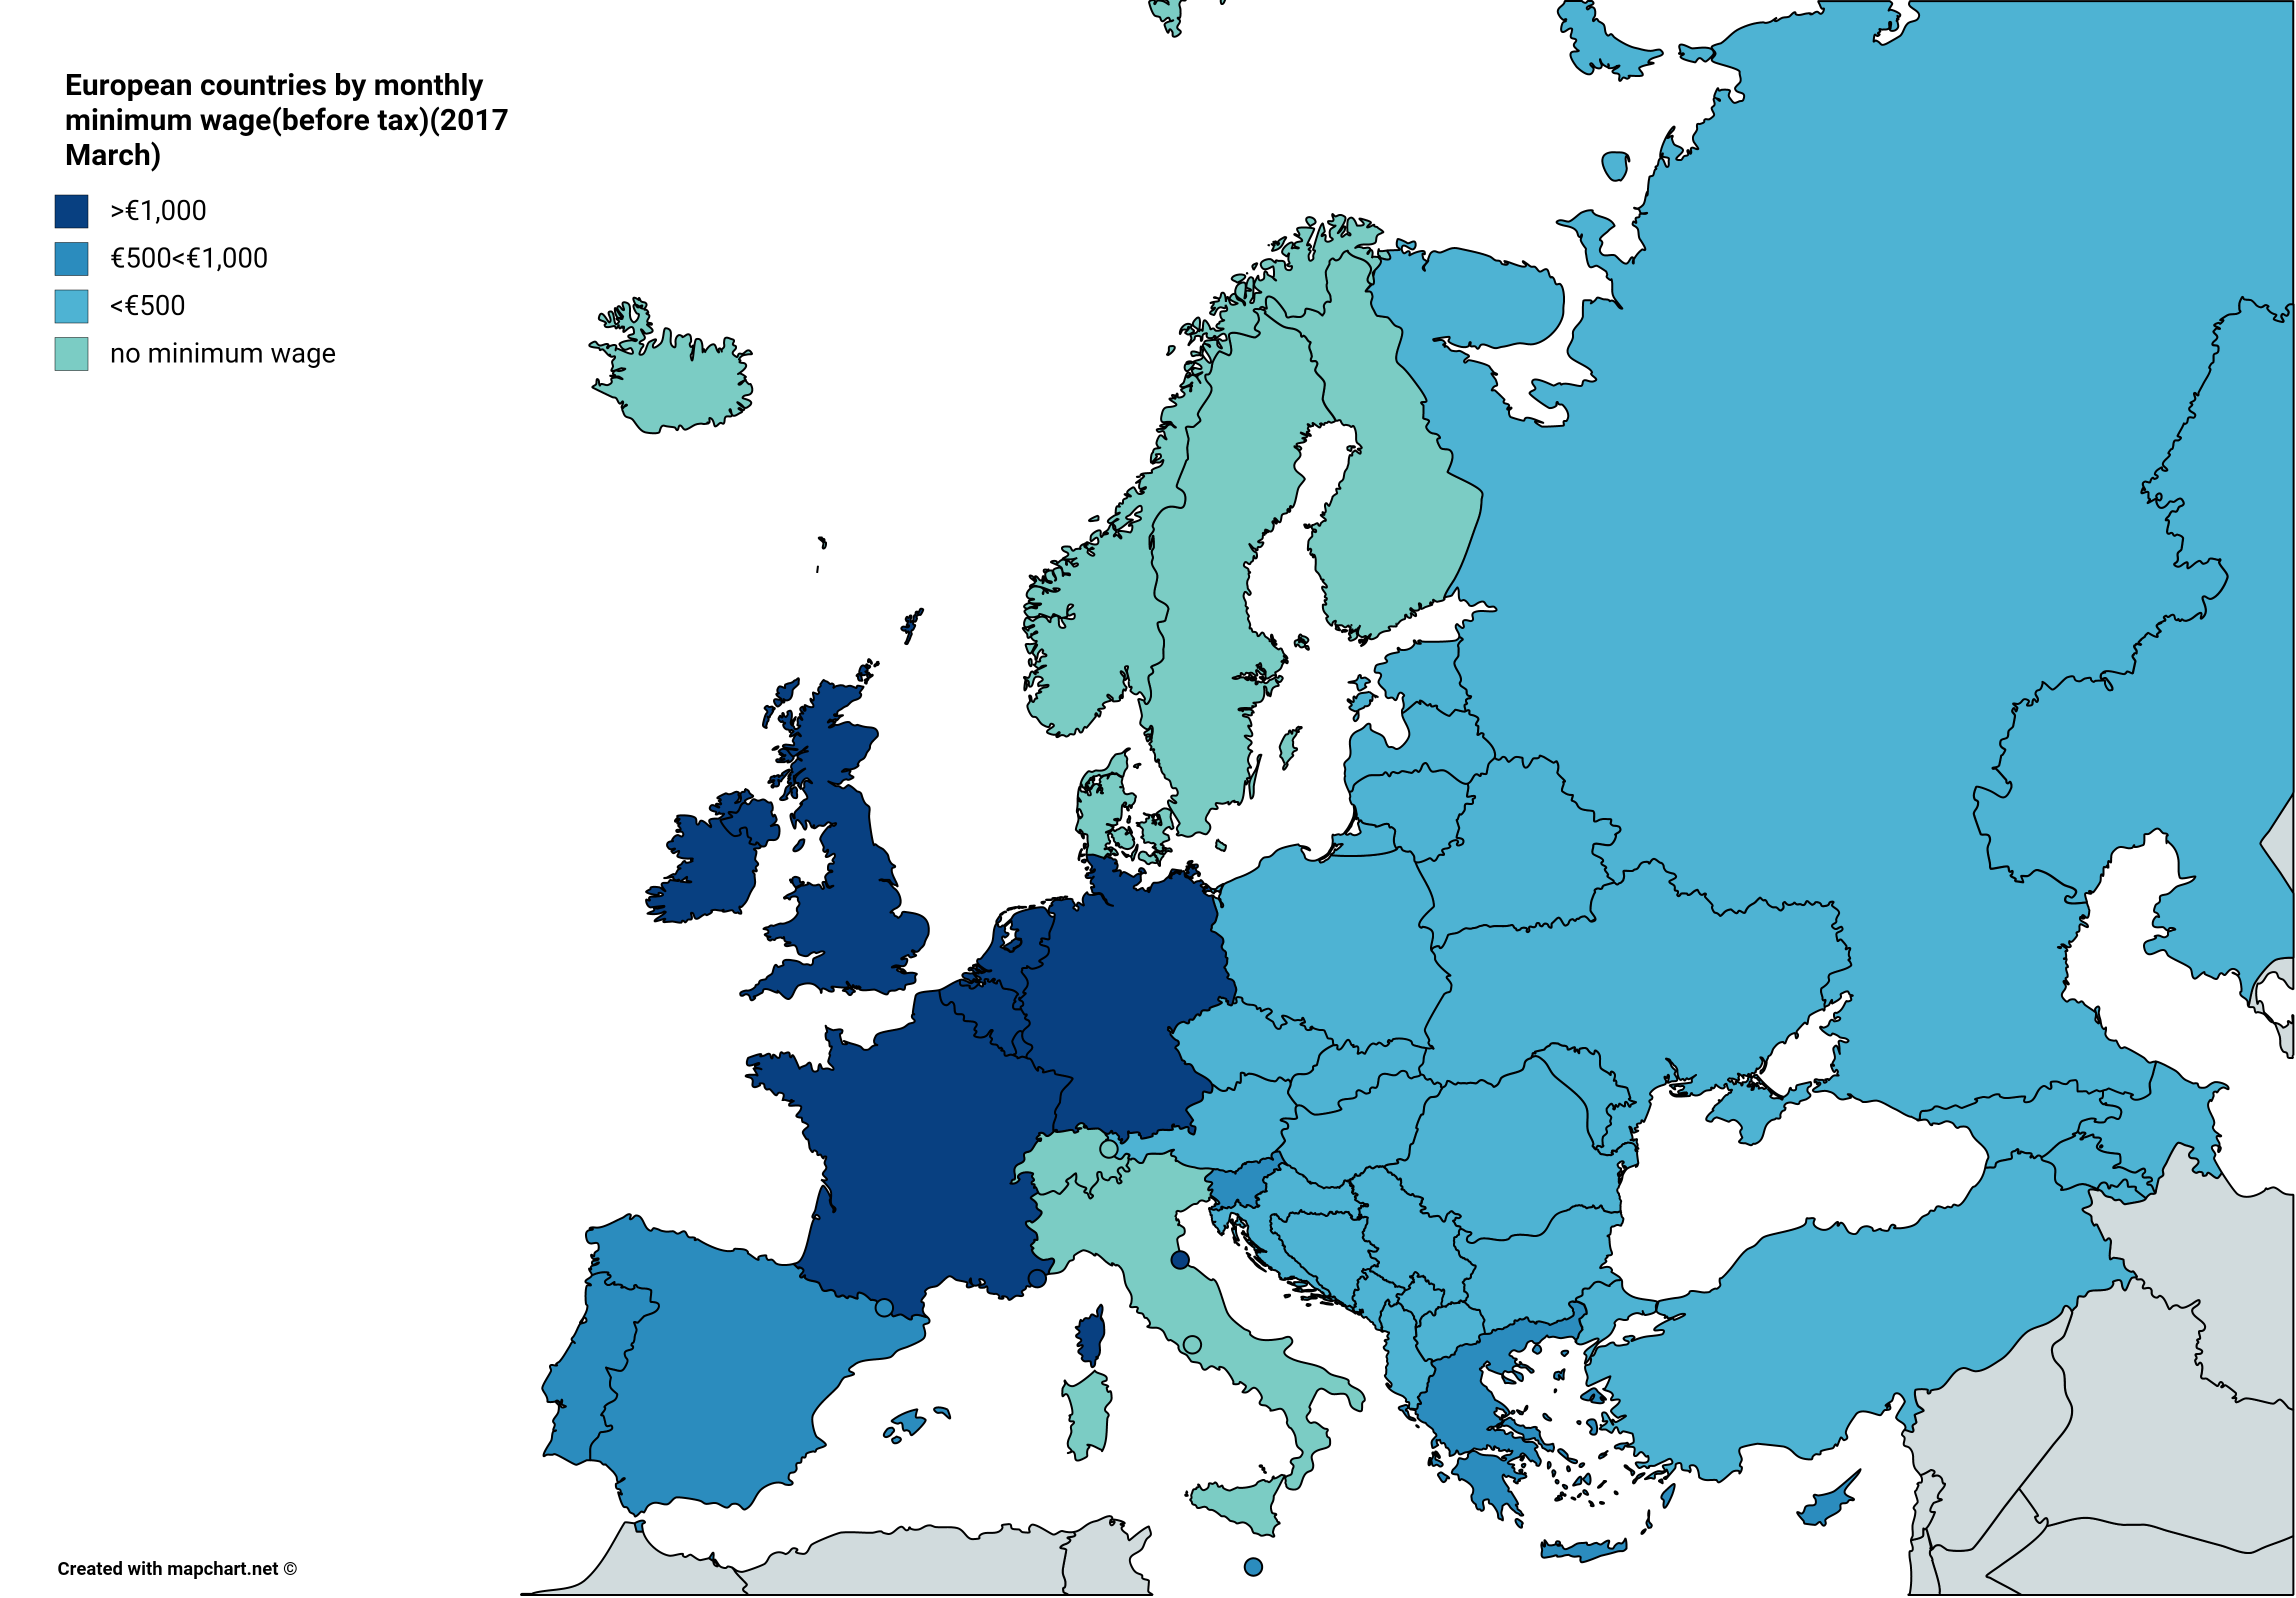 List of European countries by minimum wage